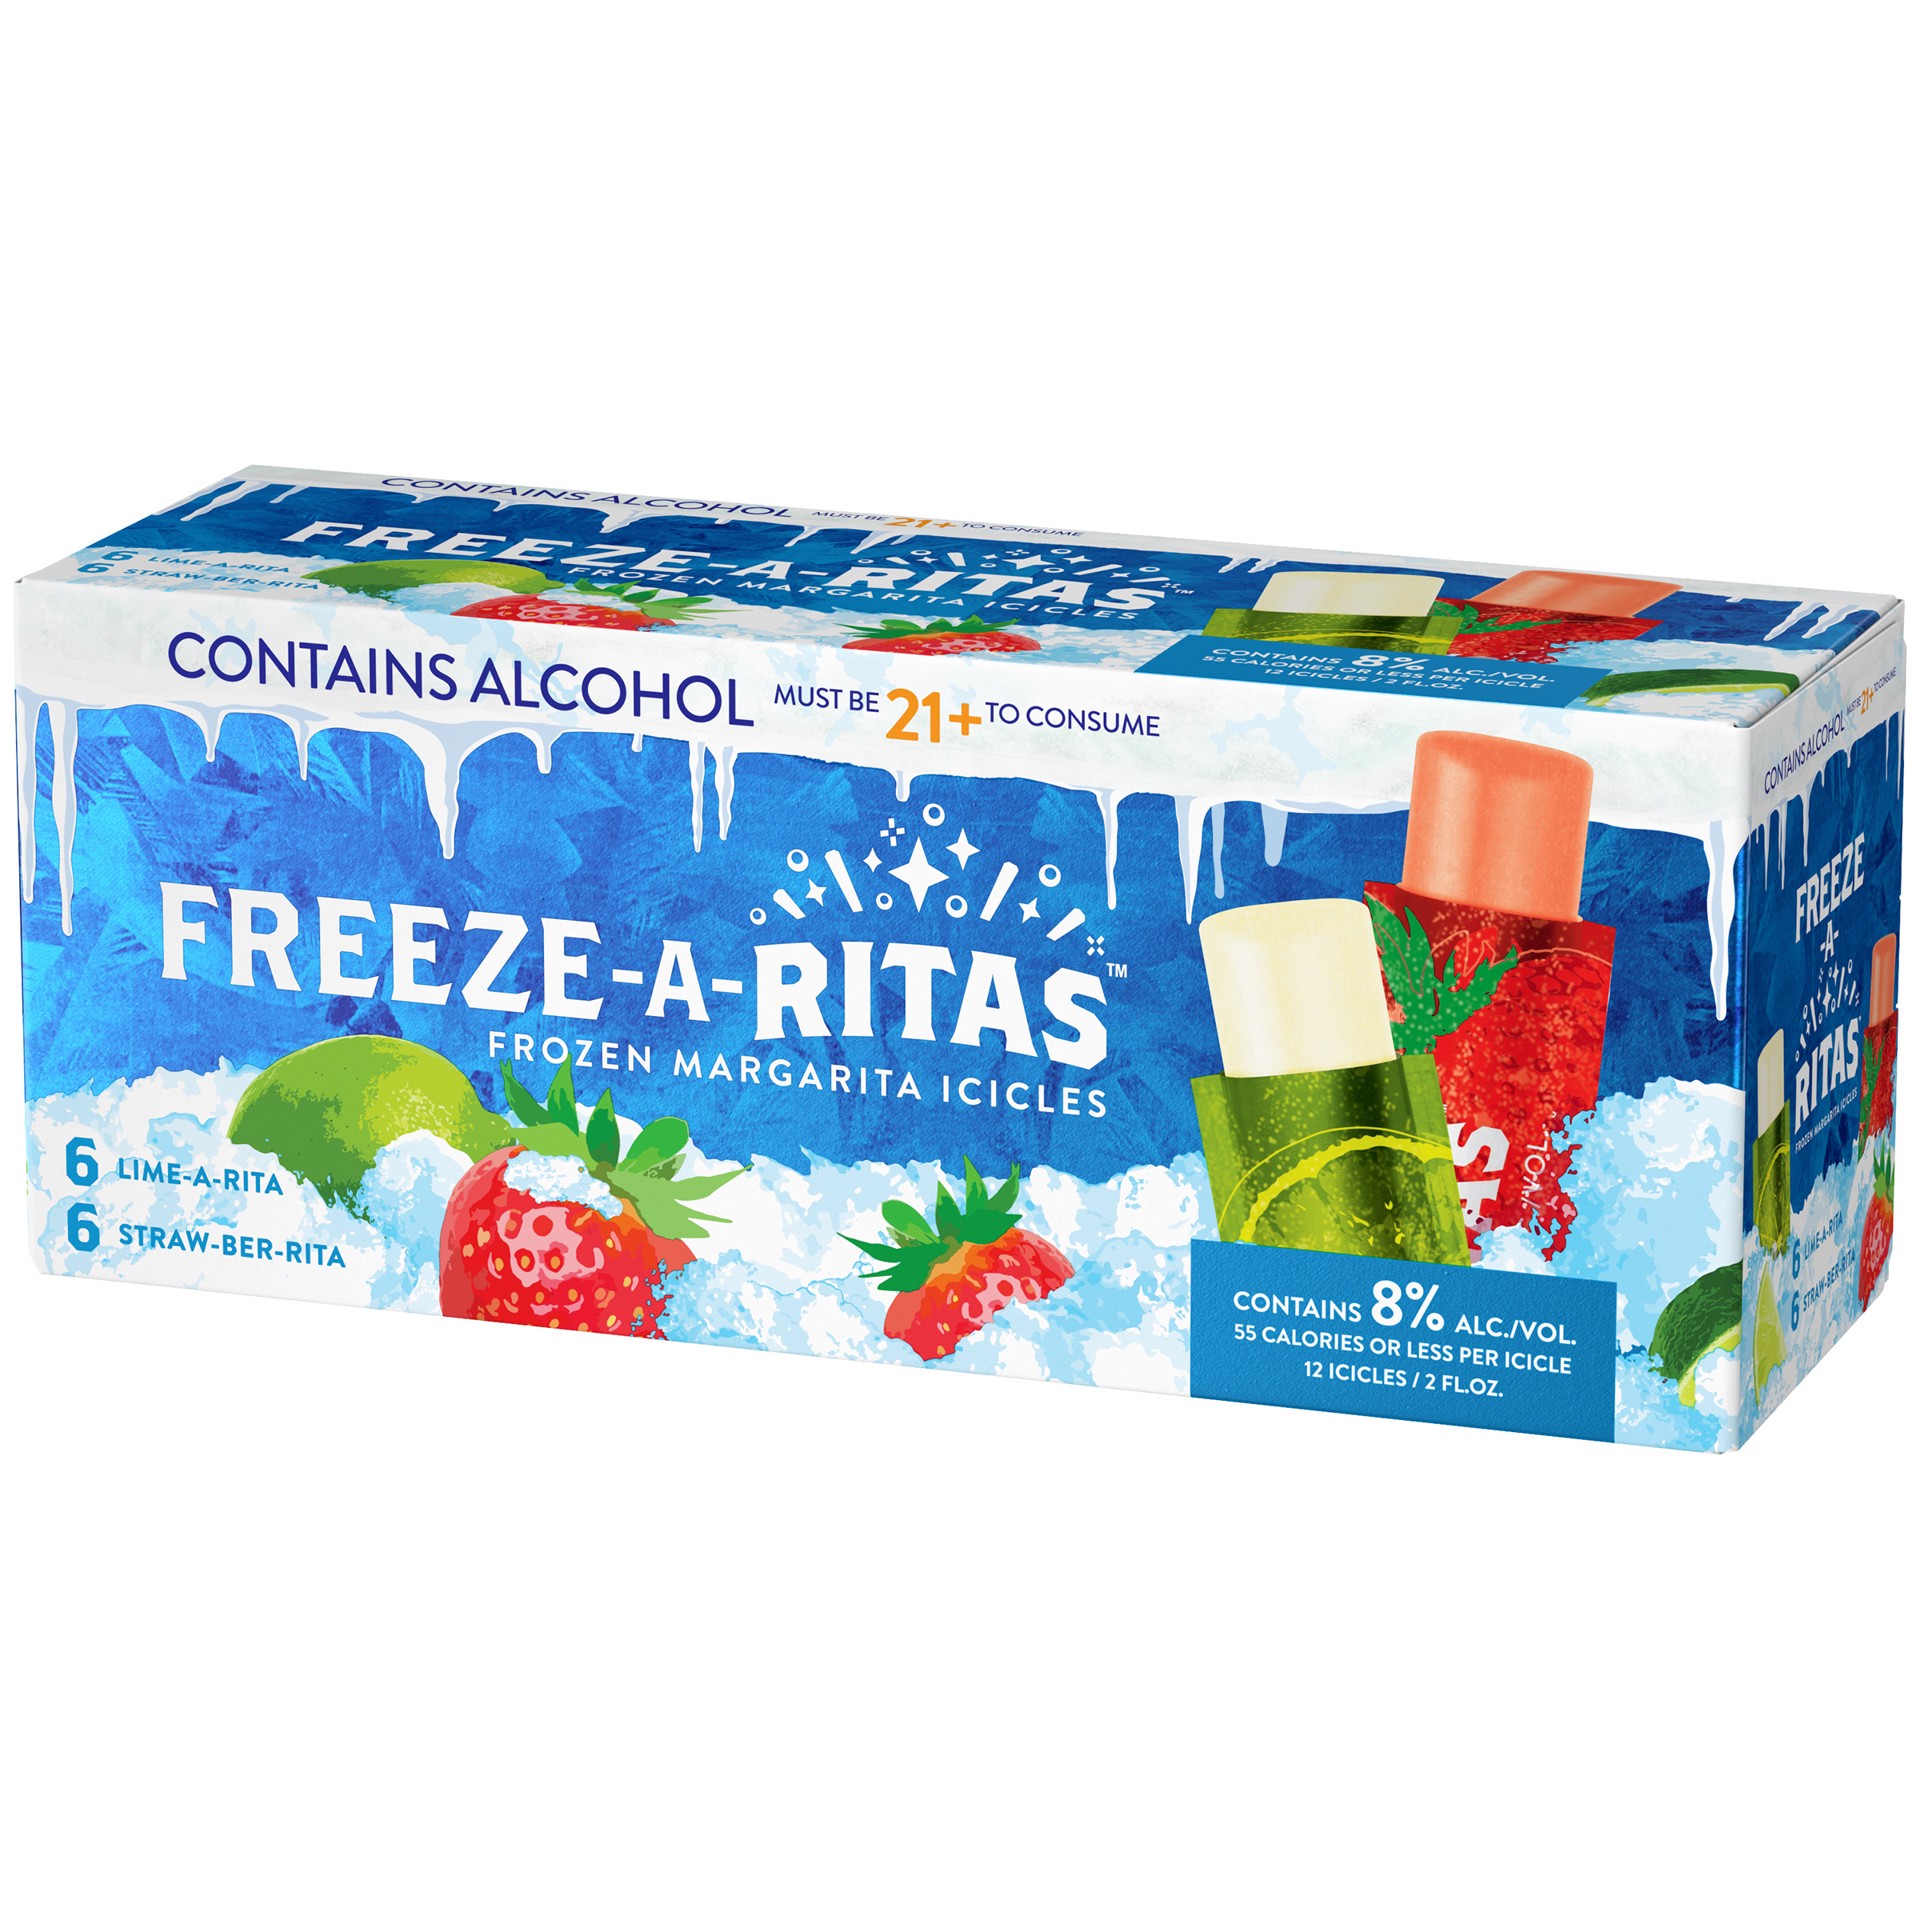 slide 2 of 3, Freeze-A-Ritas Lime-A-Rita & Straw-Ber-Rita Frozen Margarita Icicles Variety Pack, 12 Pack 2 fl. oz. Pouches, 8% ABV, 12 ct